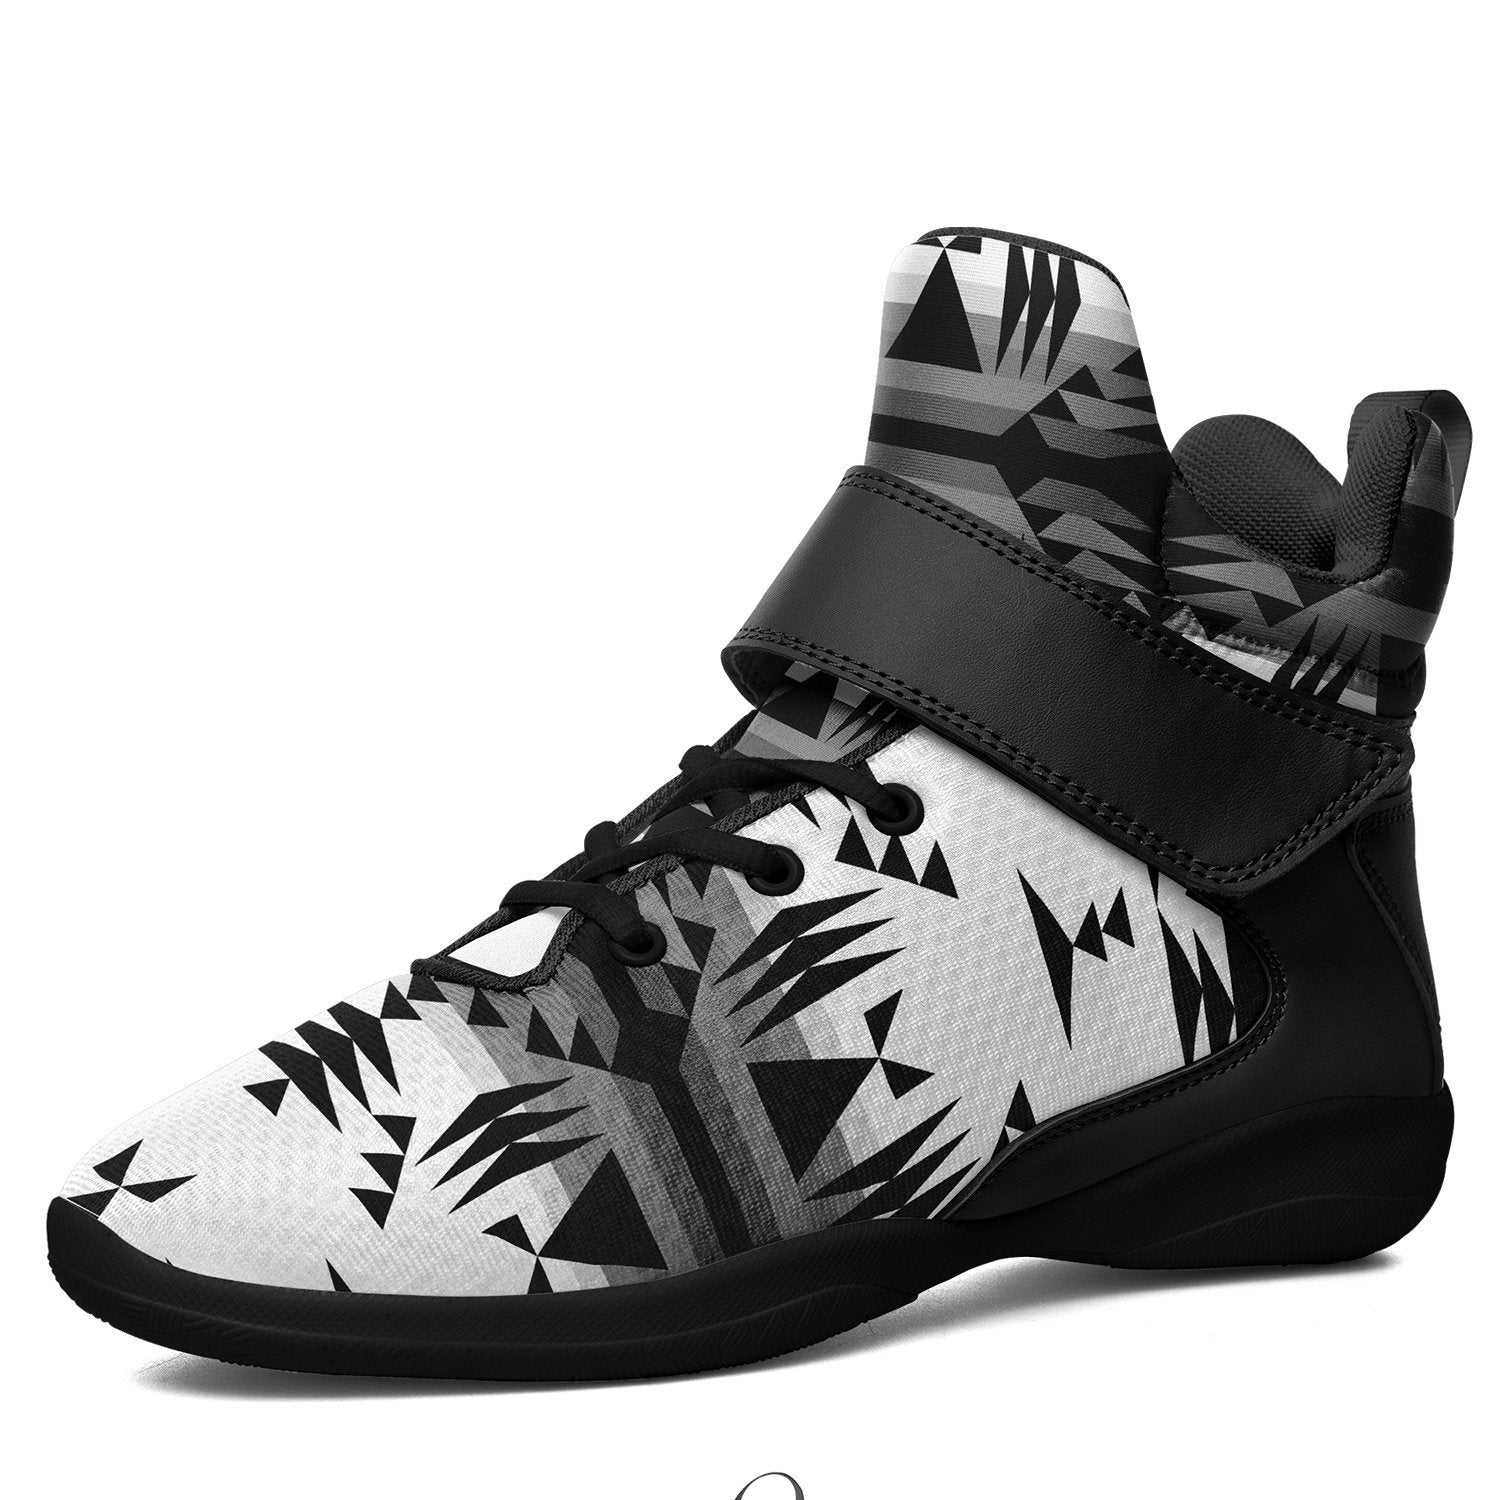 Between the Mountains White and Black Kid's Ipottaa Basketball / Sport High Top Shoes 49 Dzine US Child 12.5 / EUR 30 Black Sole with Black Strap 